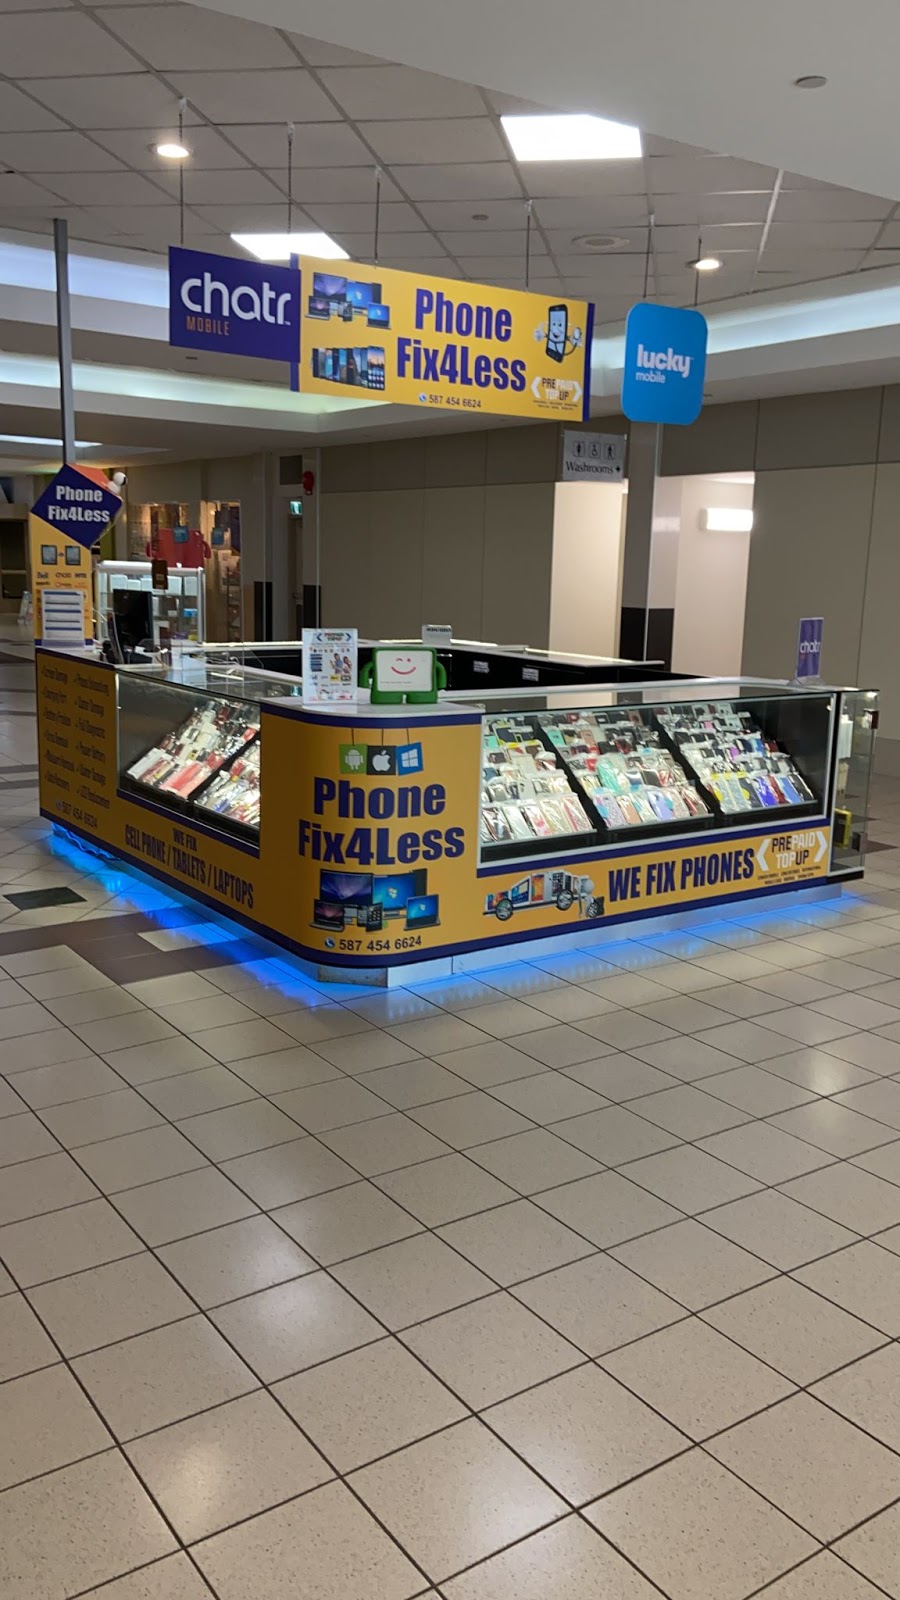 Phone Fix-4-Less | River View Crossing Mall Adj to food court, 3210 118 Ave NW Unit 124, Edmonton, AB T5W 4W1, Canada | Phone: (587) 532-9498